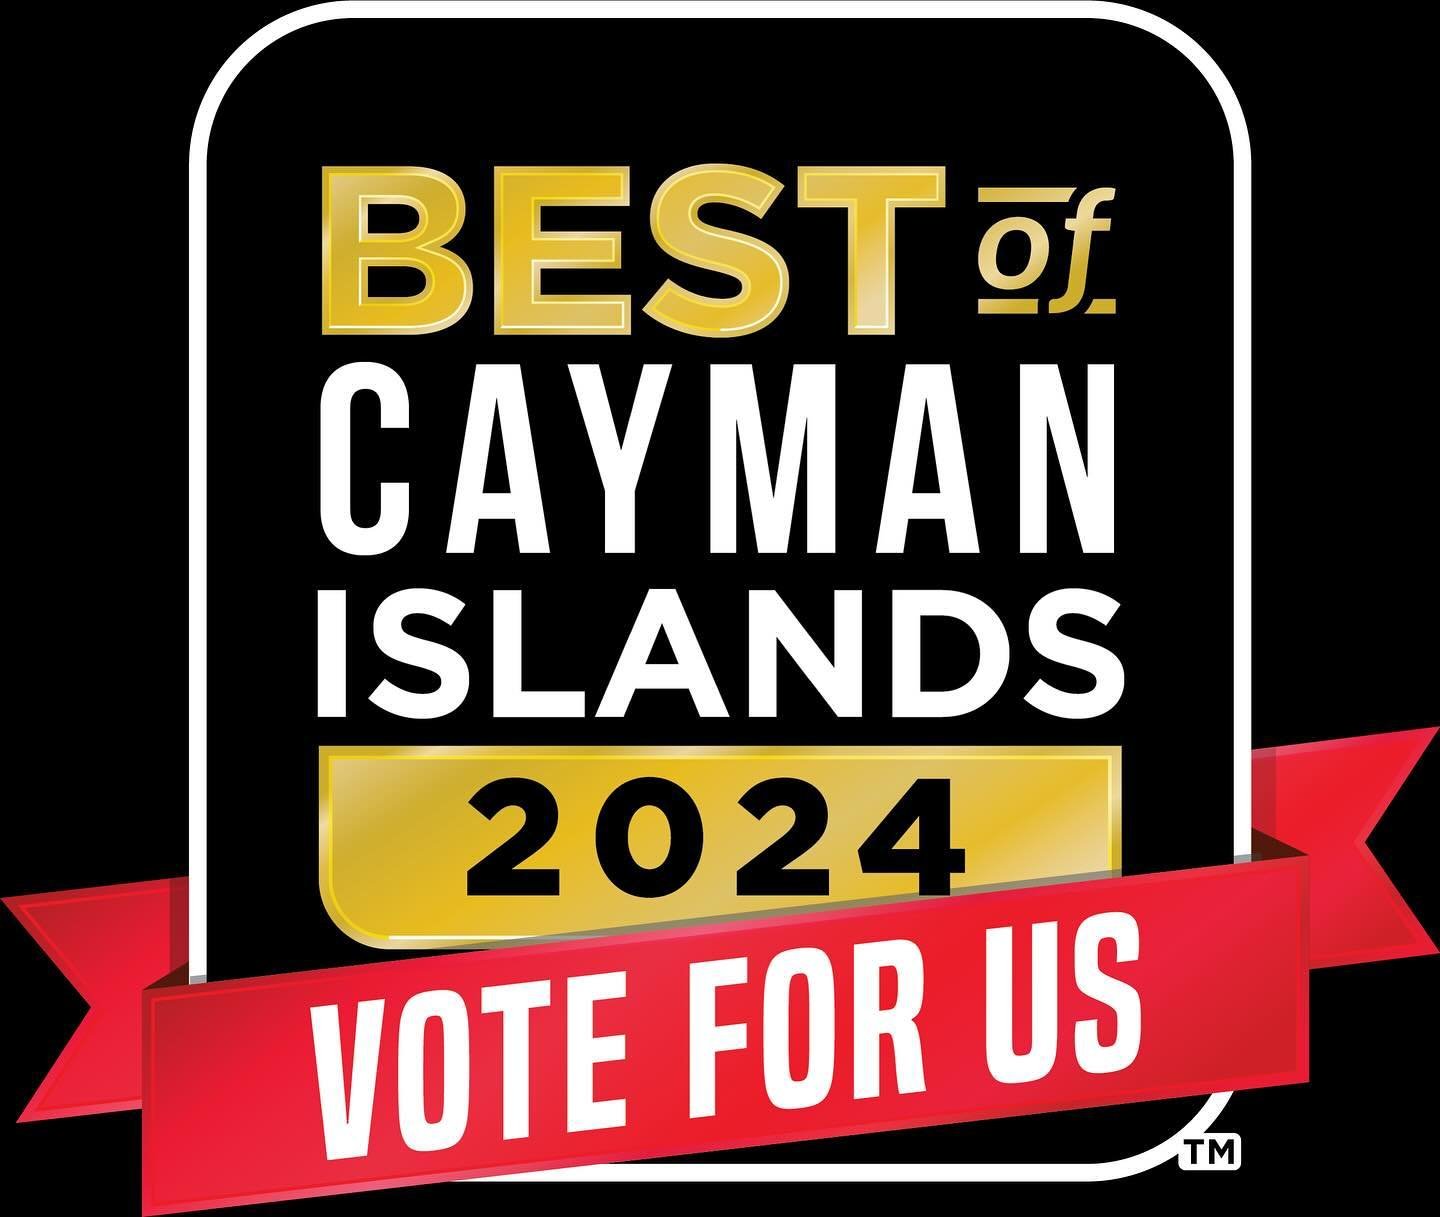 🏆 Exciting News! 🌟 Our community is celebrating the Best of Cayman Islands contest, and we&rsquo;re thrilled to be nominated as the Best Pilates Studio! 🎉 Your support means the world to us, and we would be honored to have your vote. Show your lov